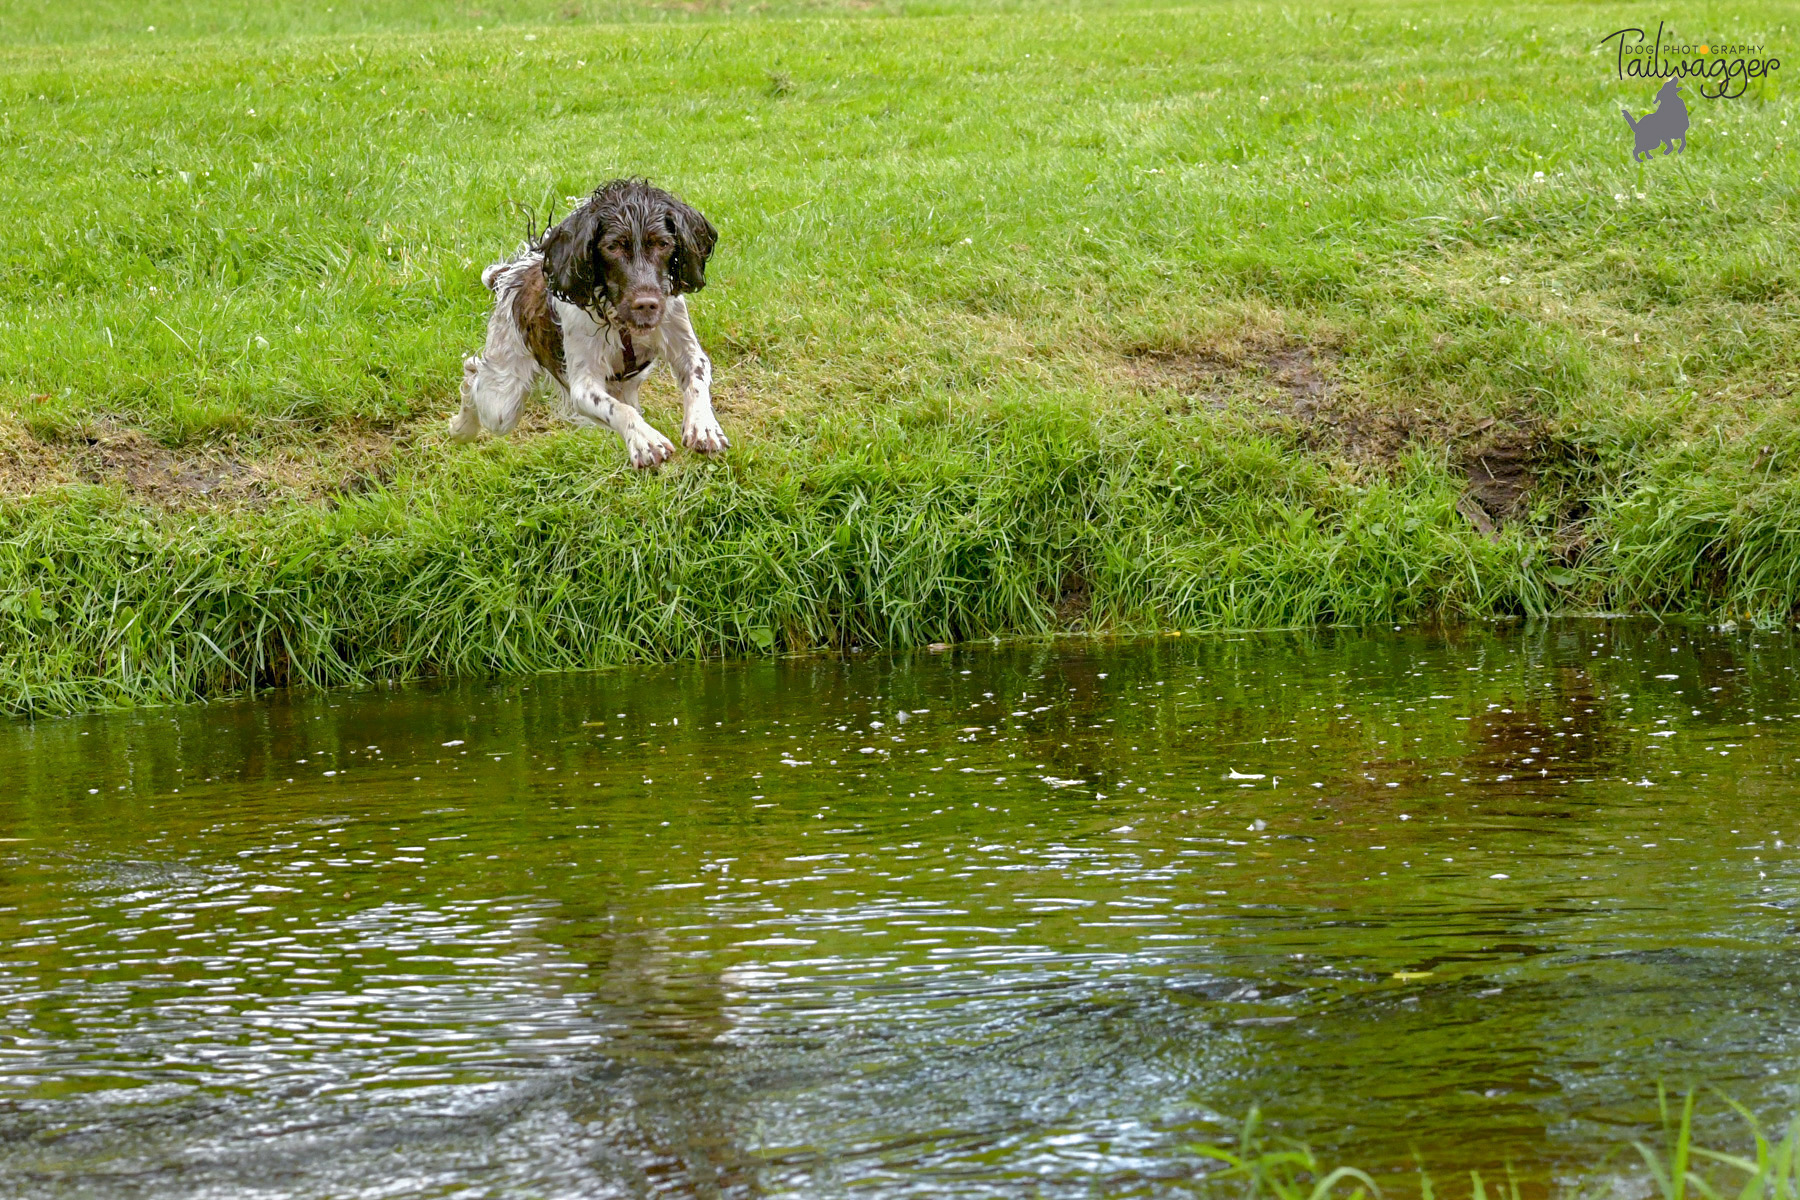 Springer Spaniel in mid-air jumping into the water at McCourtie Park.